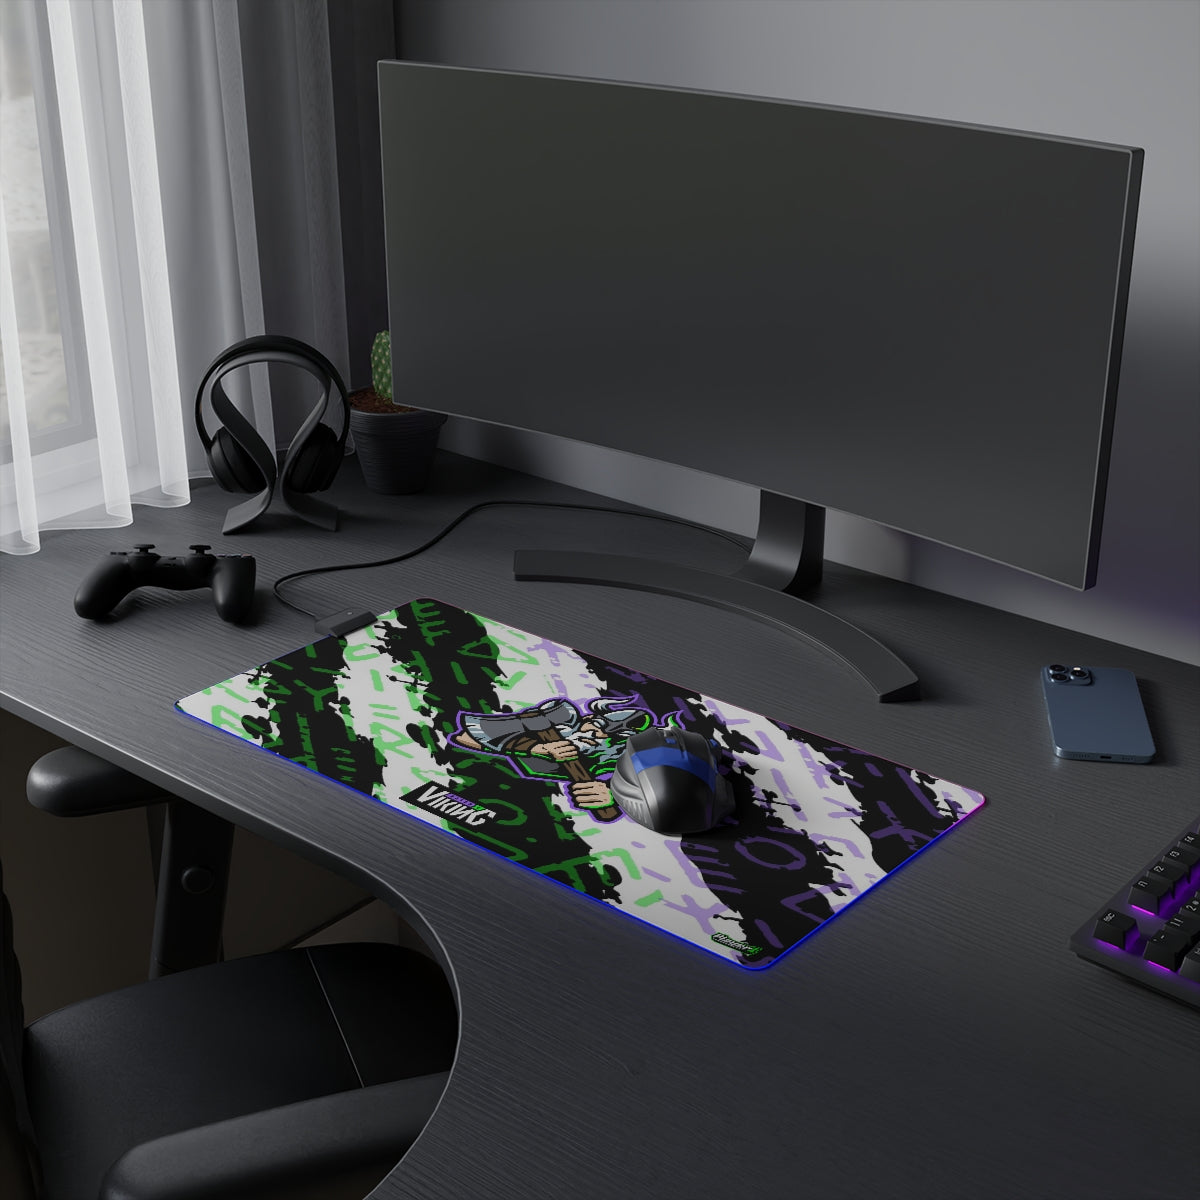 Rated R Viking LED Gaming Mouse Pad